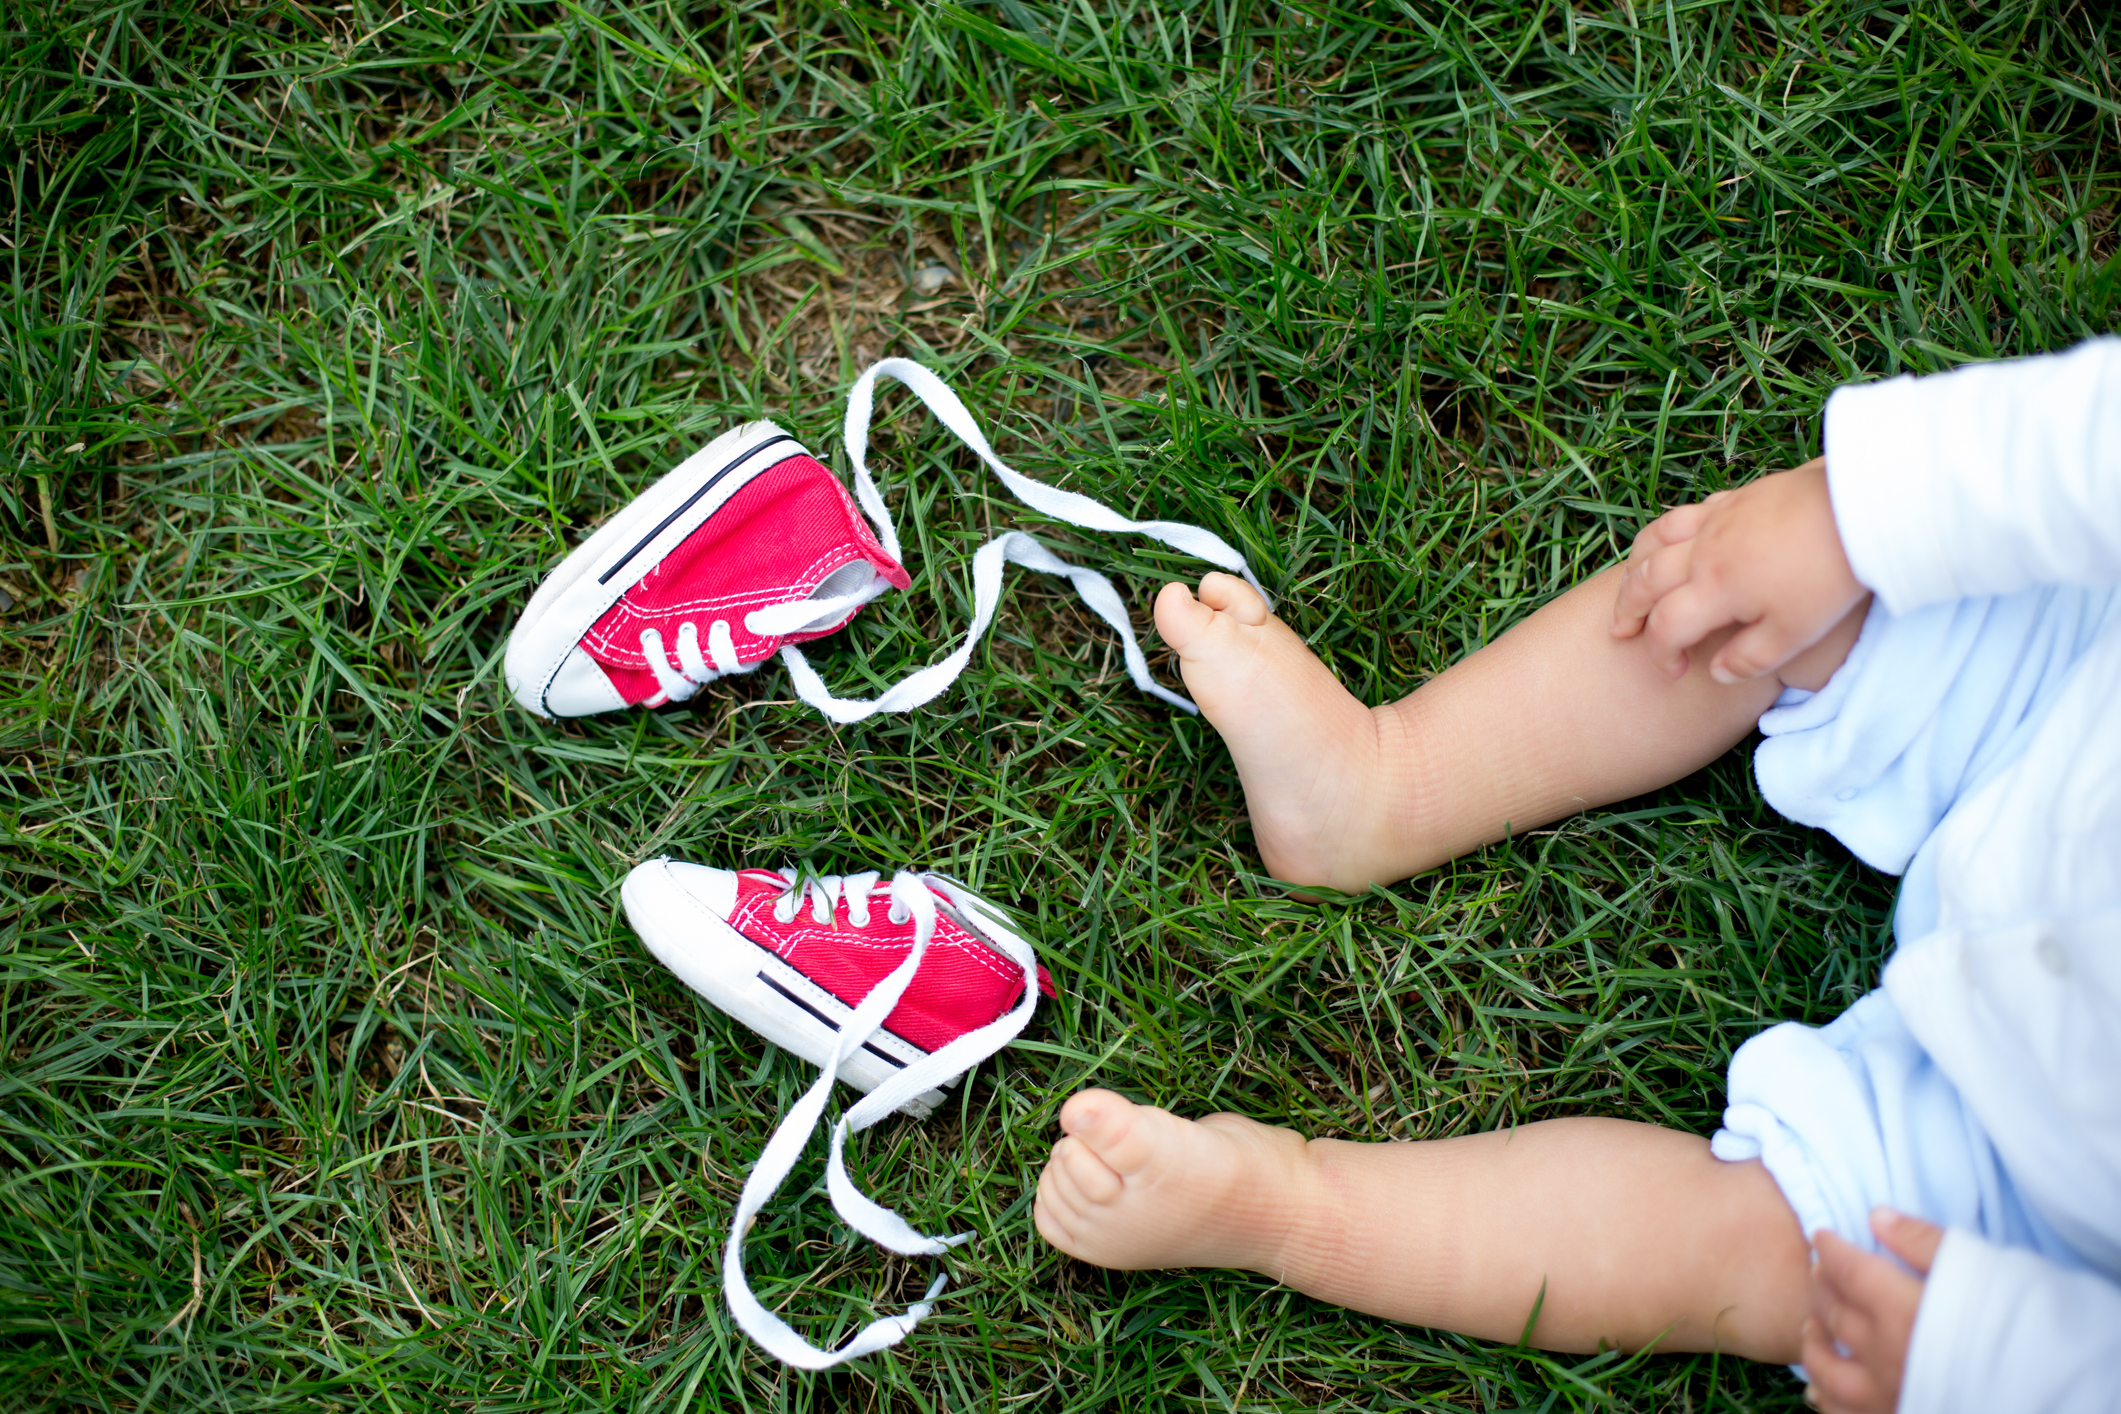 shoes that stay on toddlers feet